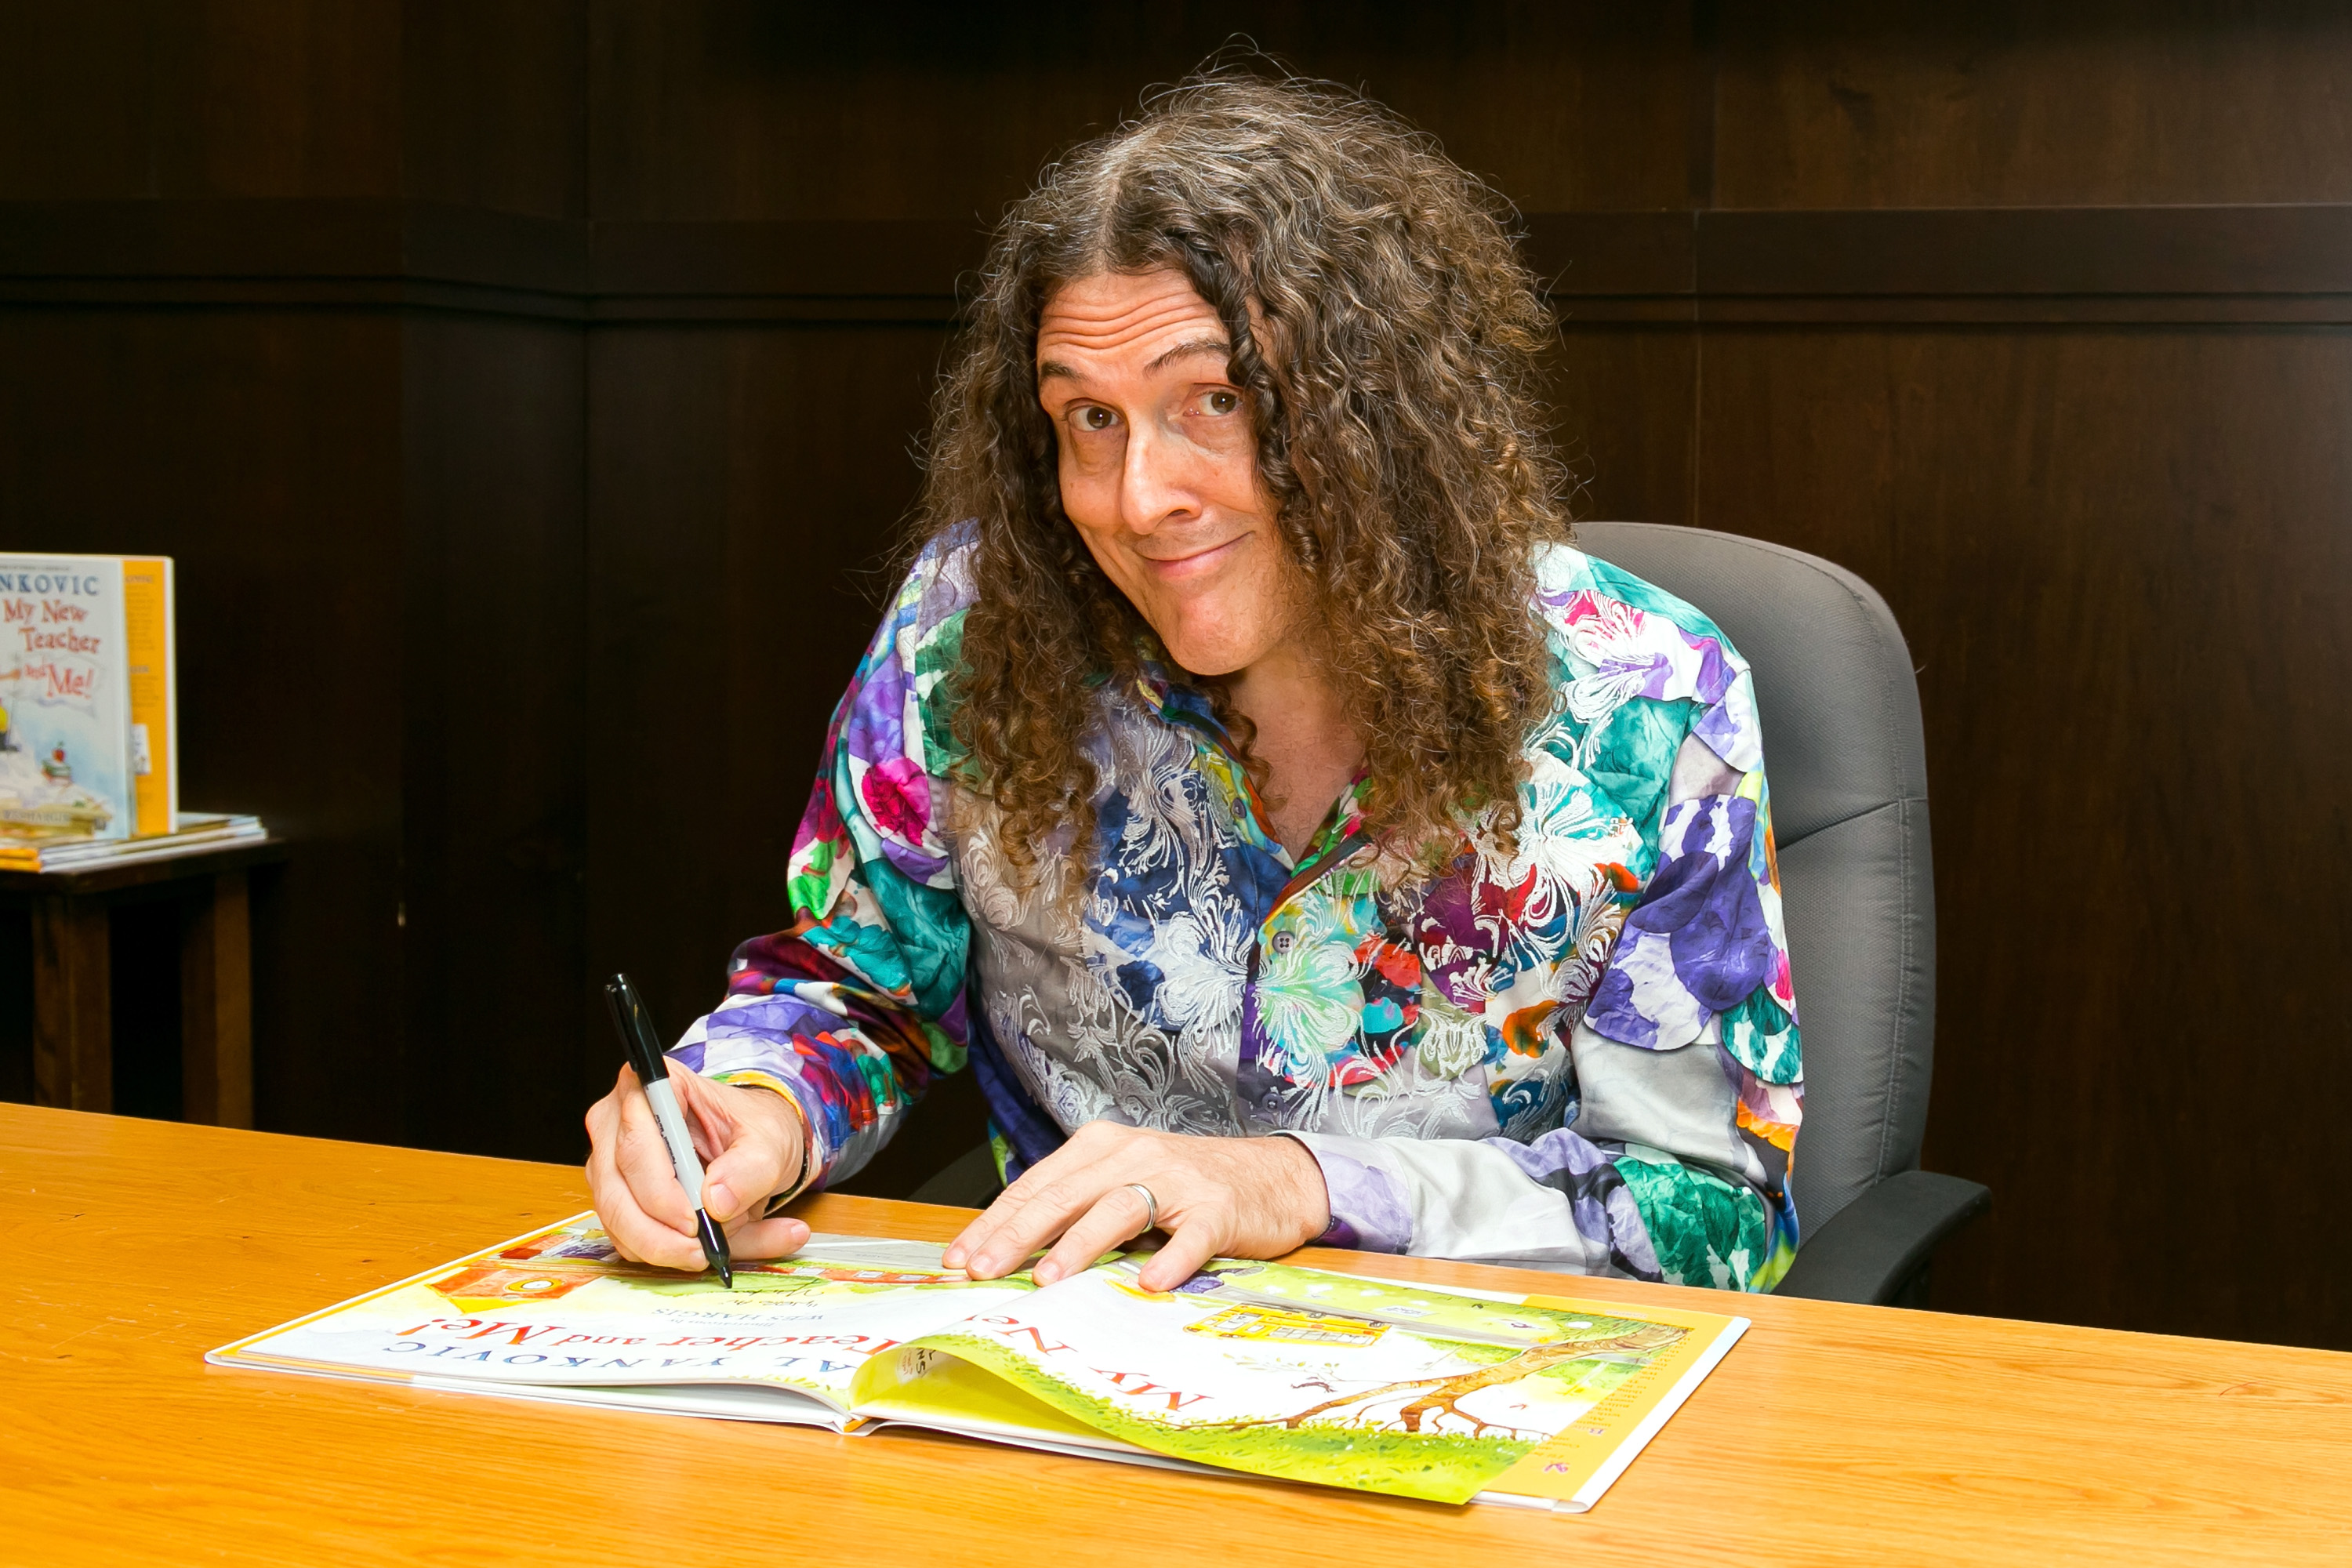 "Weird Al" Yankovic Book Signing For "My New Teacher And Me"